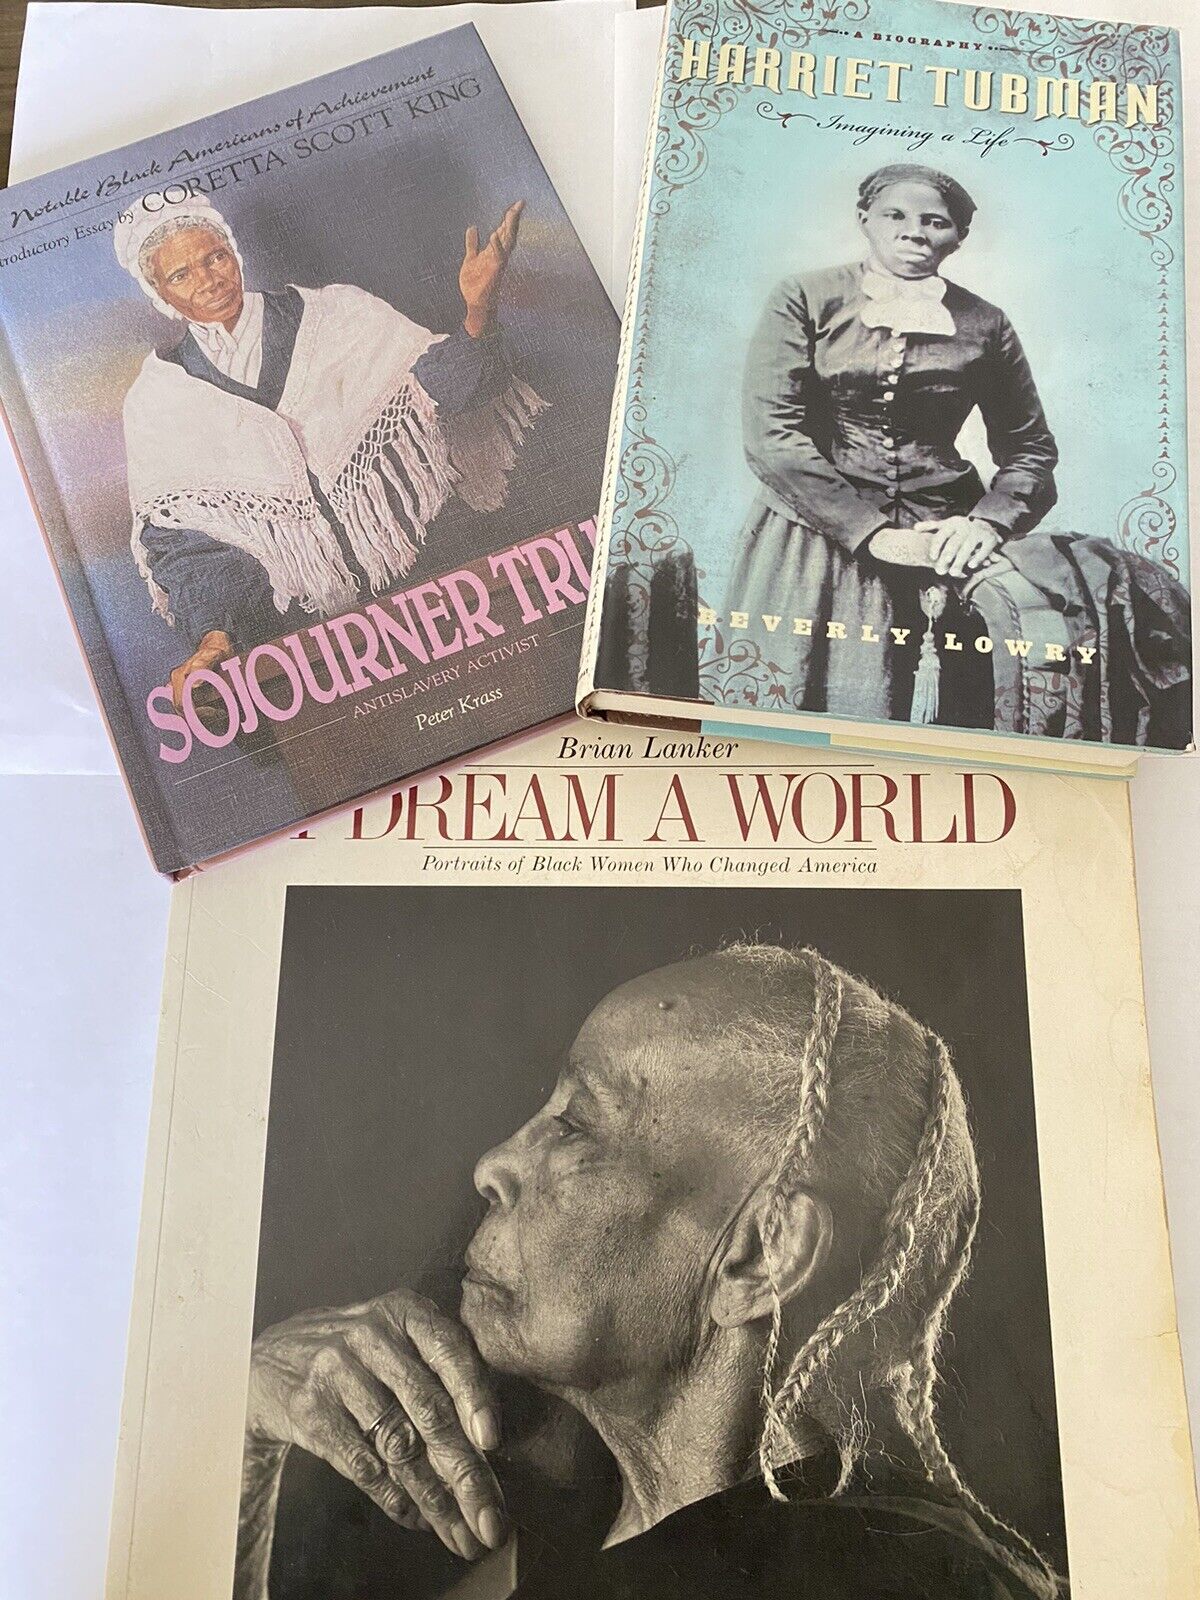 LOT of 3 Books Assorted African American Women Tubman Sojourner I Dream A World